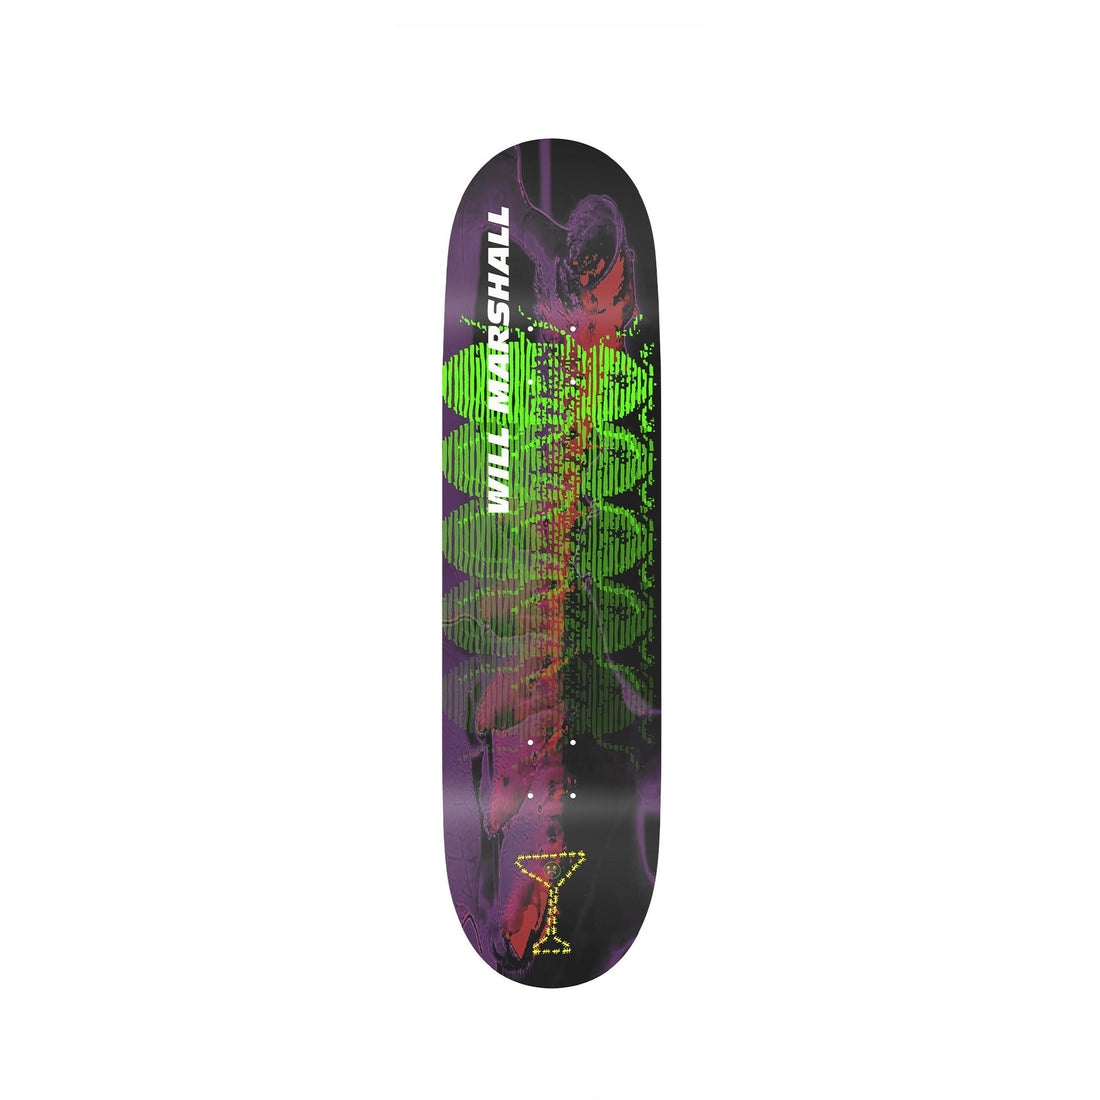 ALLTIMERS WILL BUGS LIFE DECK 8.125